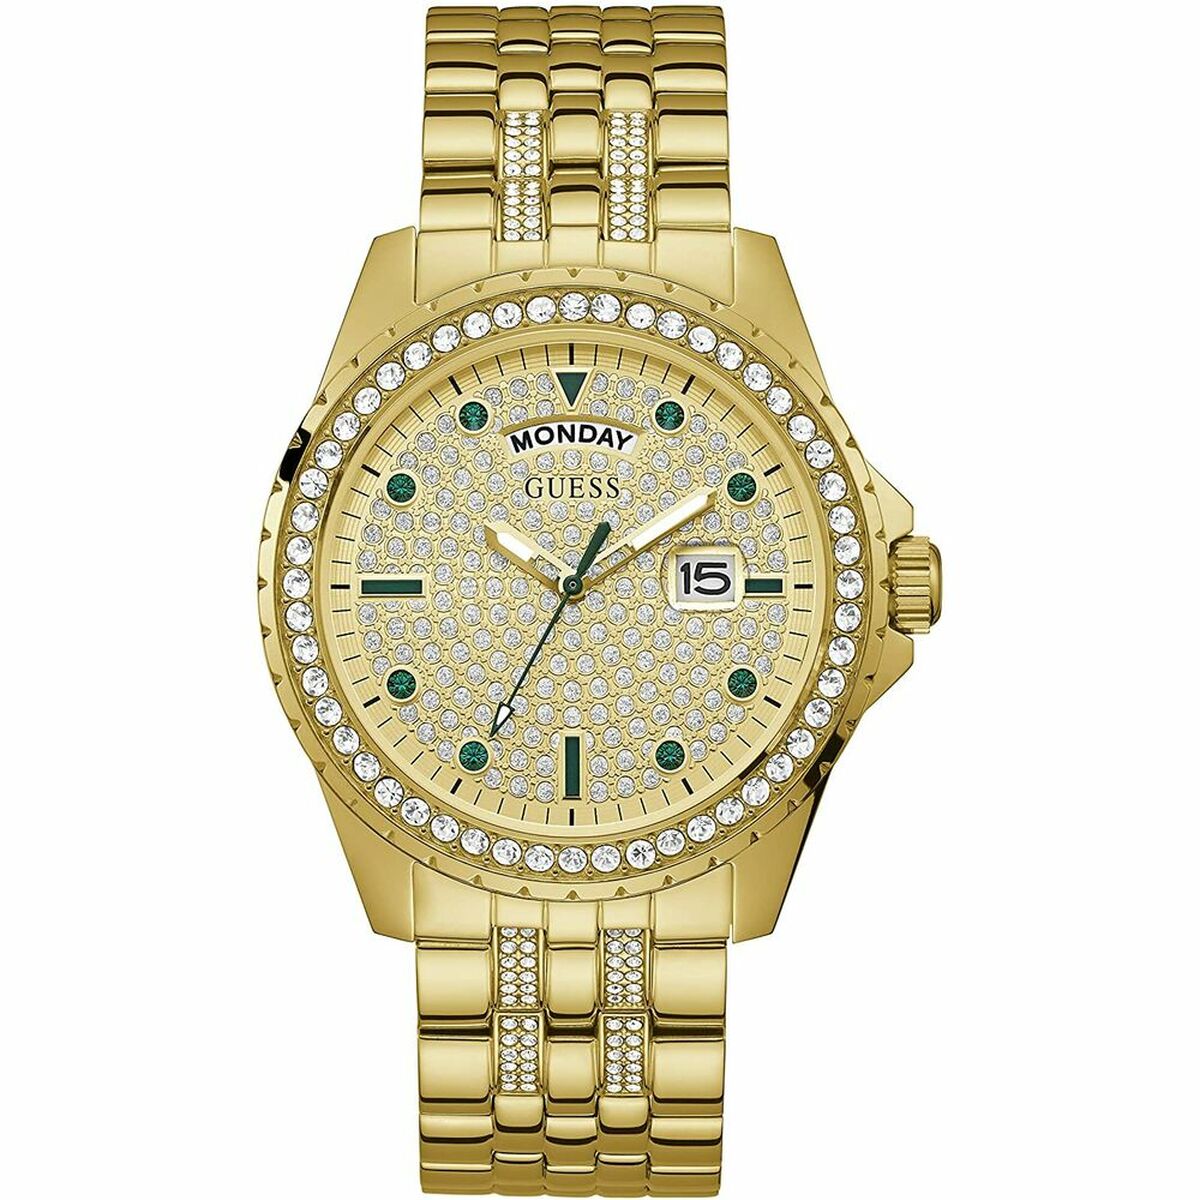 Ladies' Watch Guess GW0218G2 (Ø 44 mm), Guess, Watches, Women, ladies-watch-guess-gw0218g2-o-44-mm, Brand_Guess, category-reference-2570, category-reference-2635, category-reference-2995, category-reference-t-19667, category-reference-t-19725, Condition_NEW, fashion, original gifts, Price_100 - 200, RiotNook